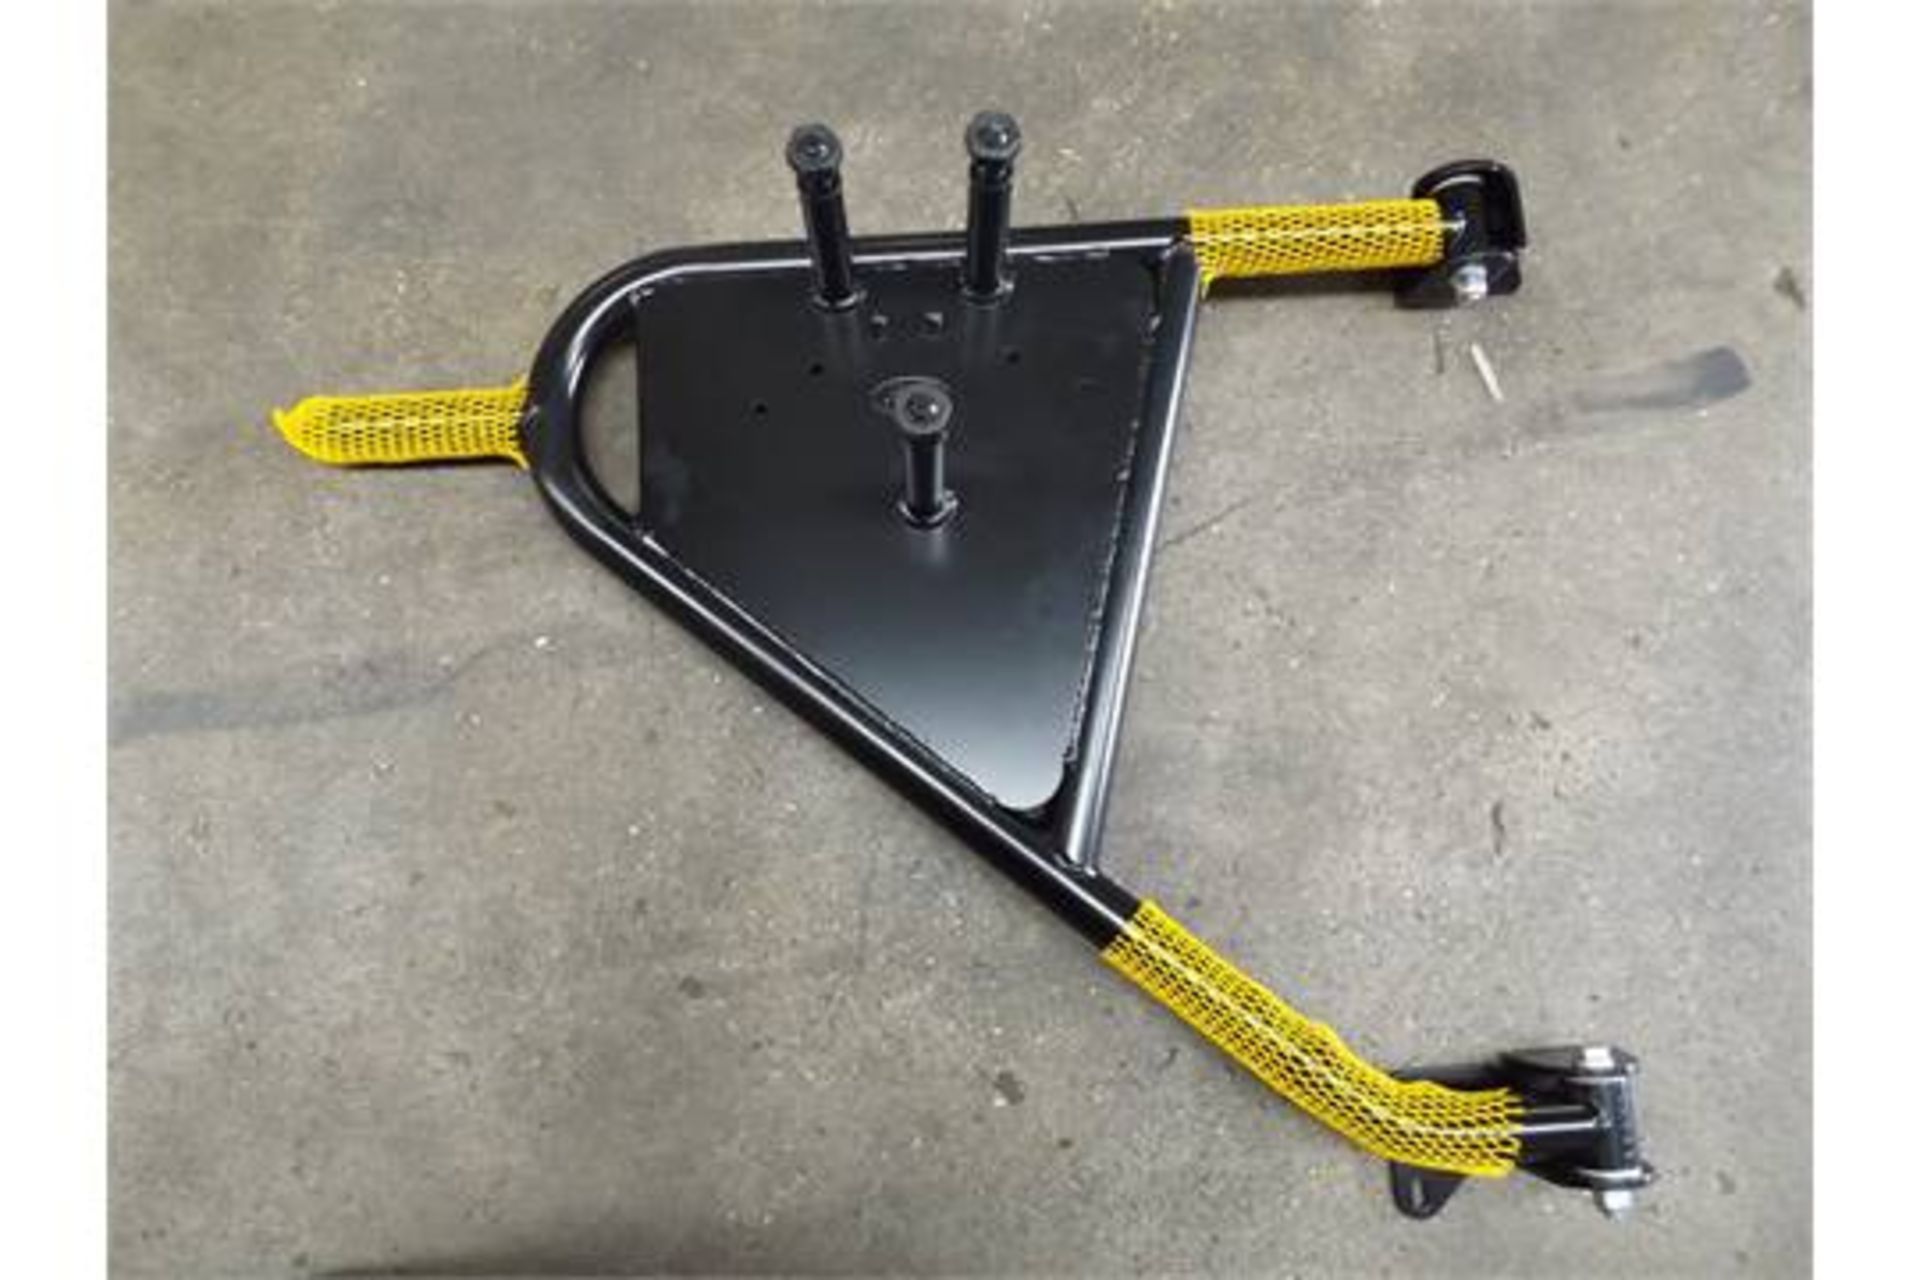 10 x Land Rover Defender Soft Top Swing Out Spare Wheel Carrier Kits VPLDR0129 - Image 3 of 10